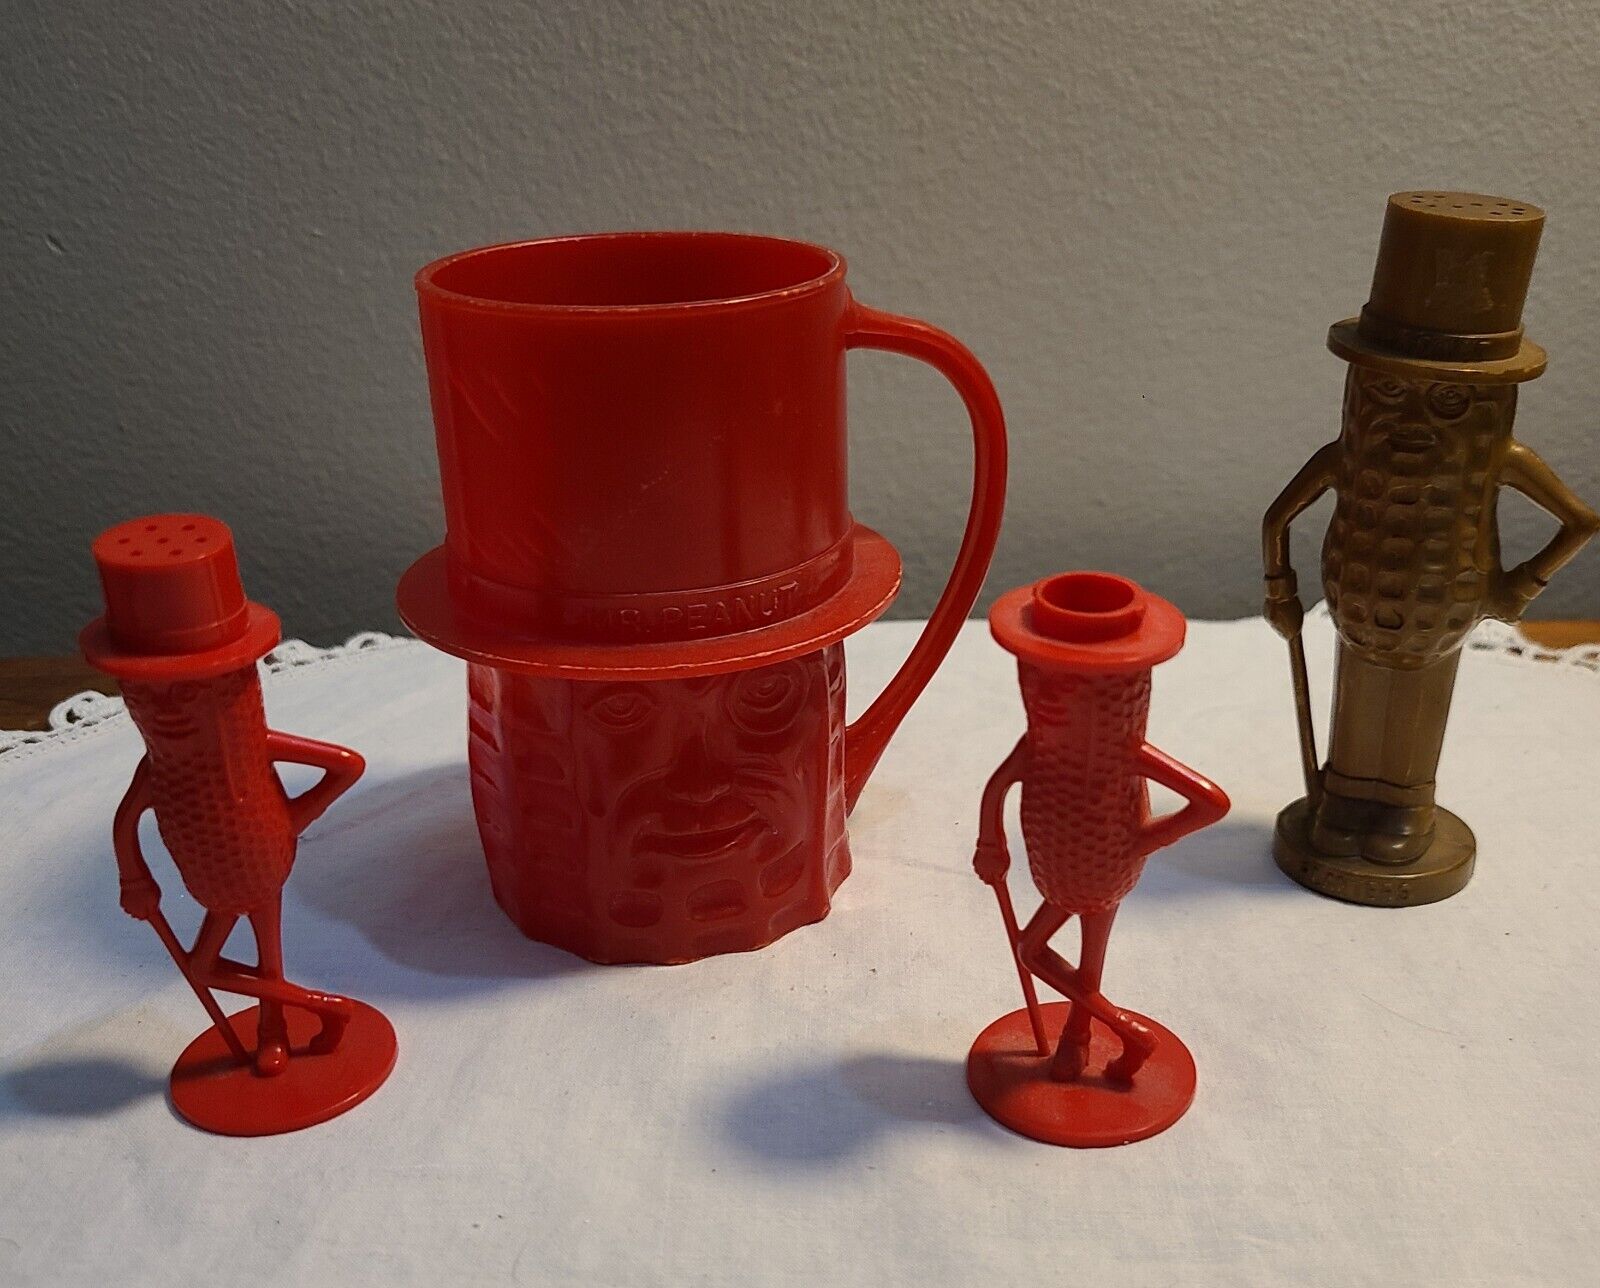 Lot of 4 Vintage Planters MR. PEANUT Collectibles SALT/PEPPER-CUP- 3 Red/1 Brown